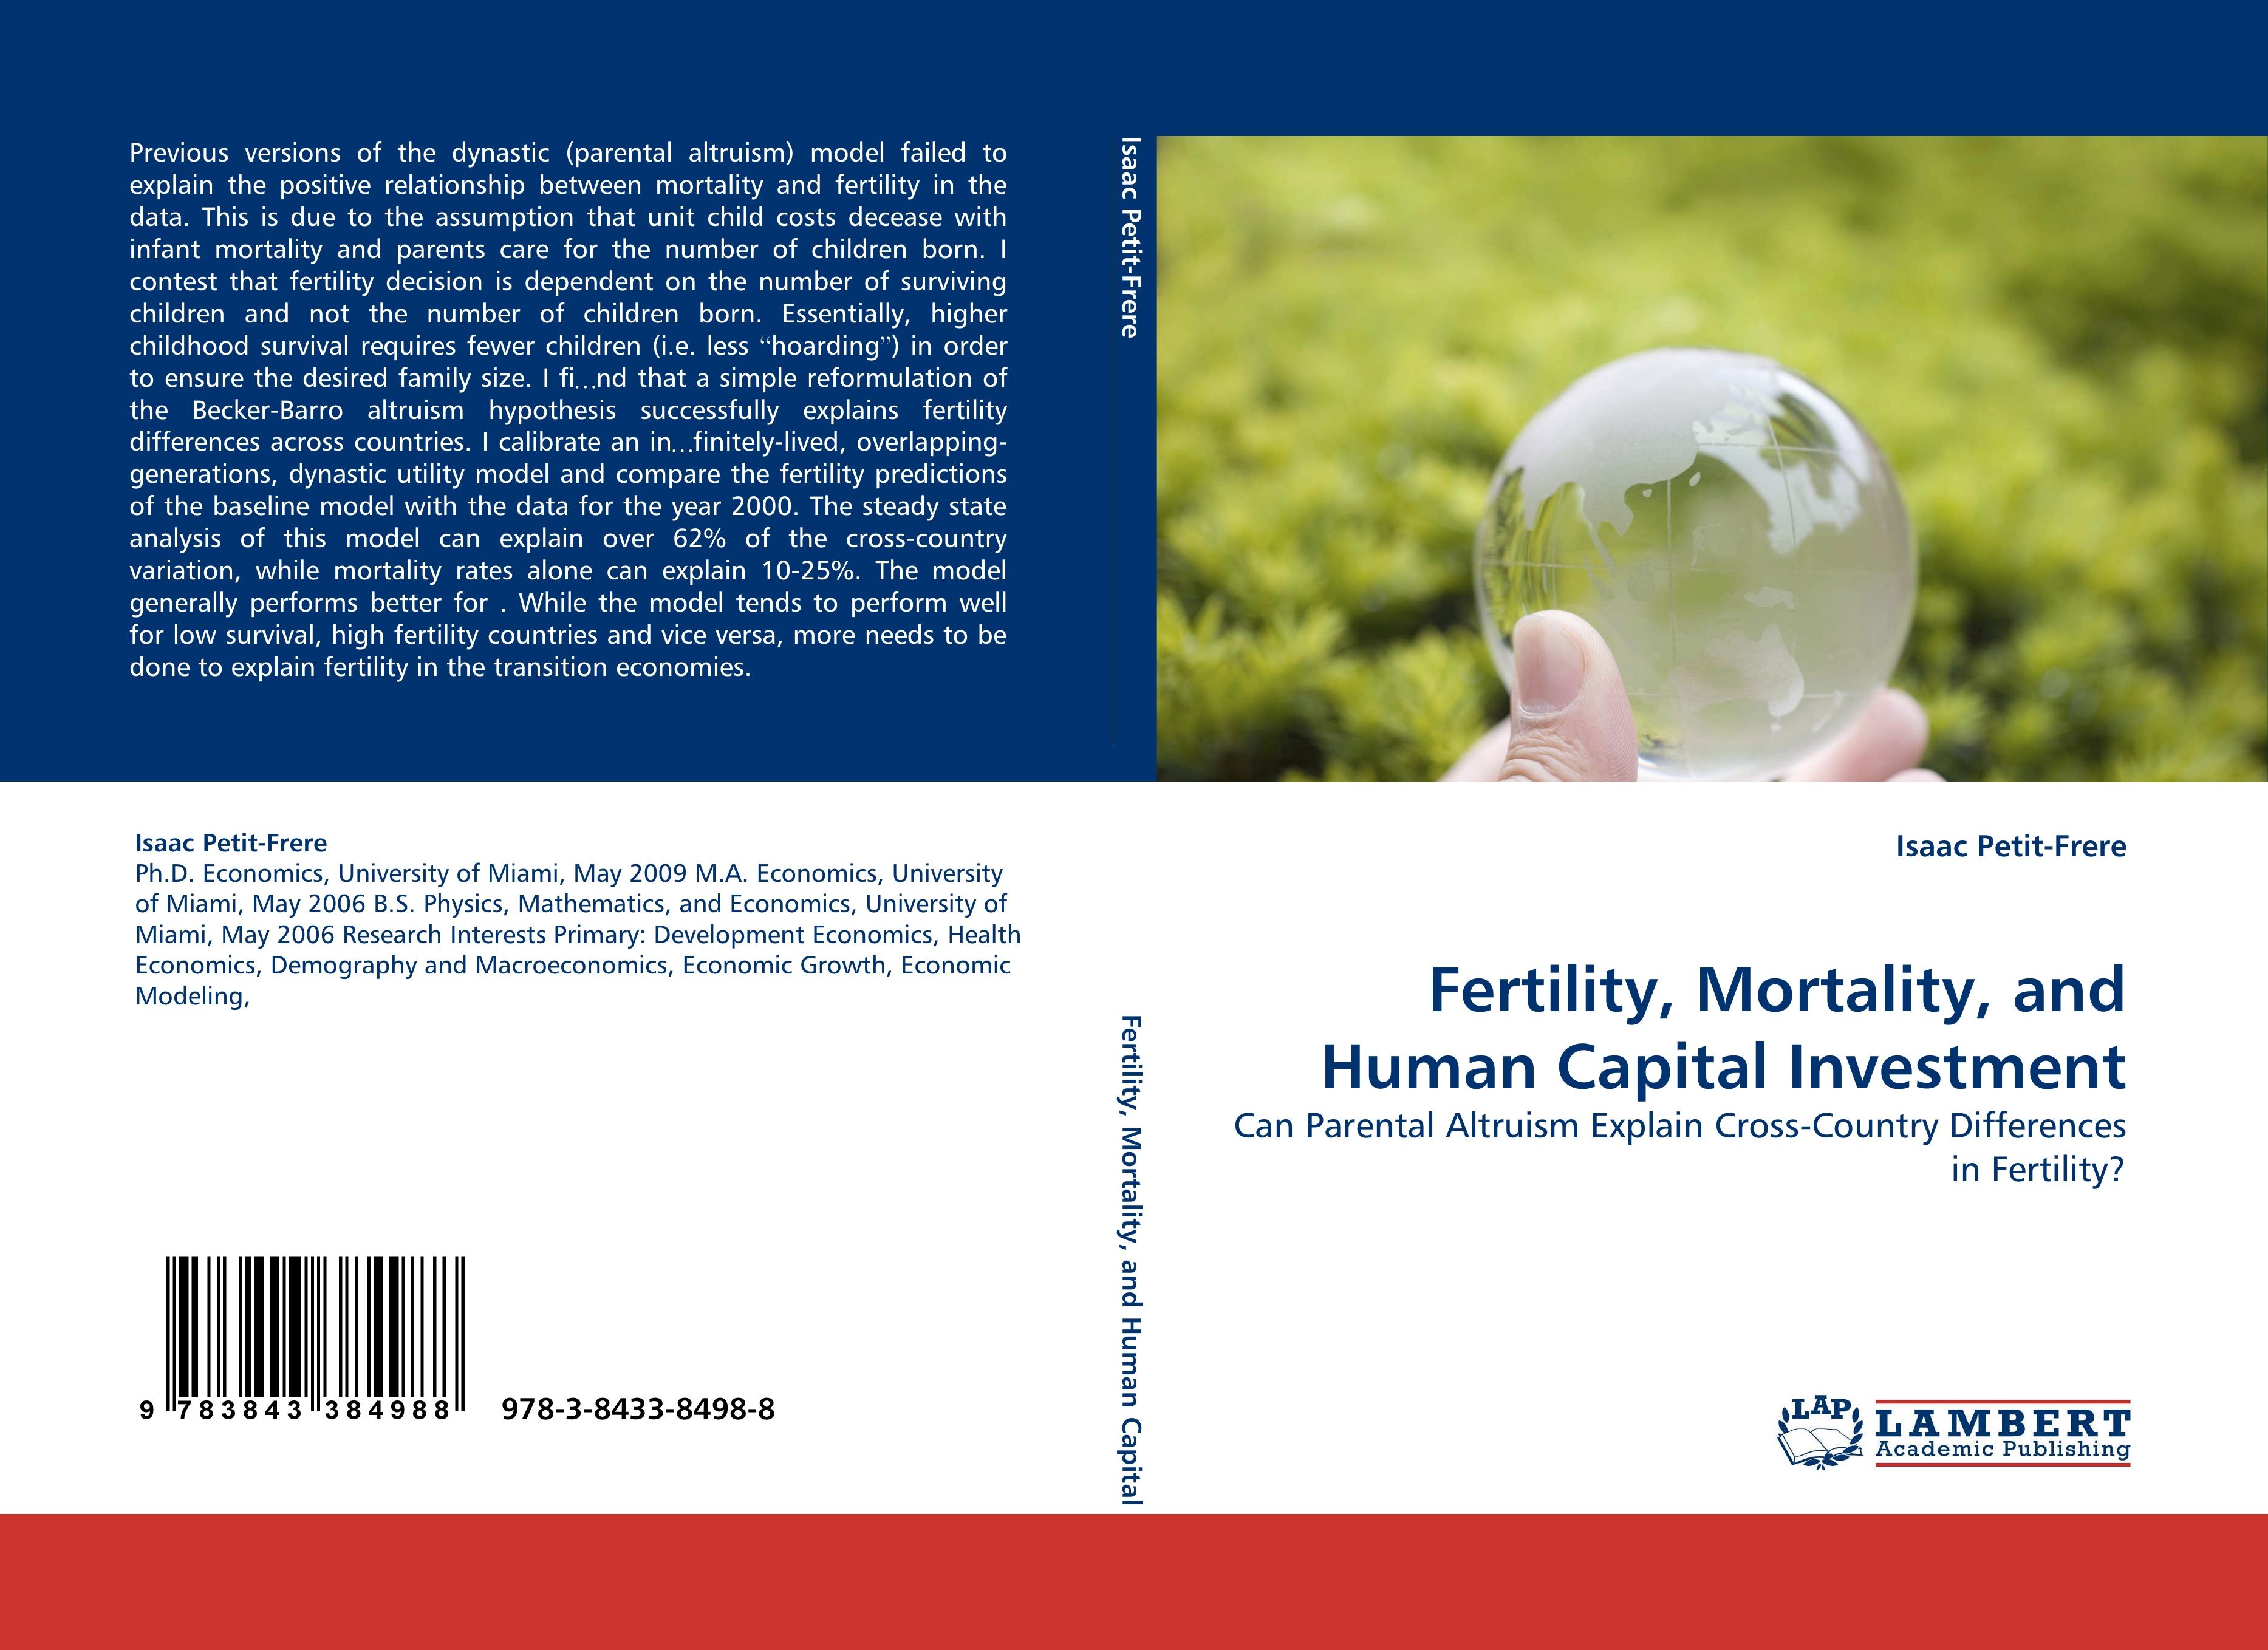 Fertility, Mortality, and Human Capital Investment - Isaac Petit-Frere